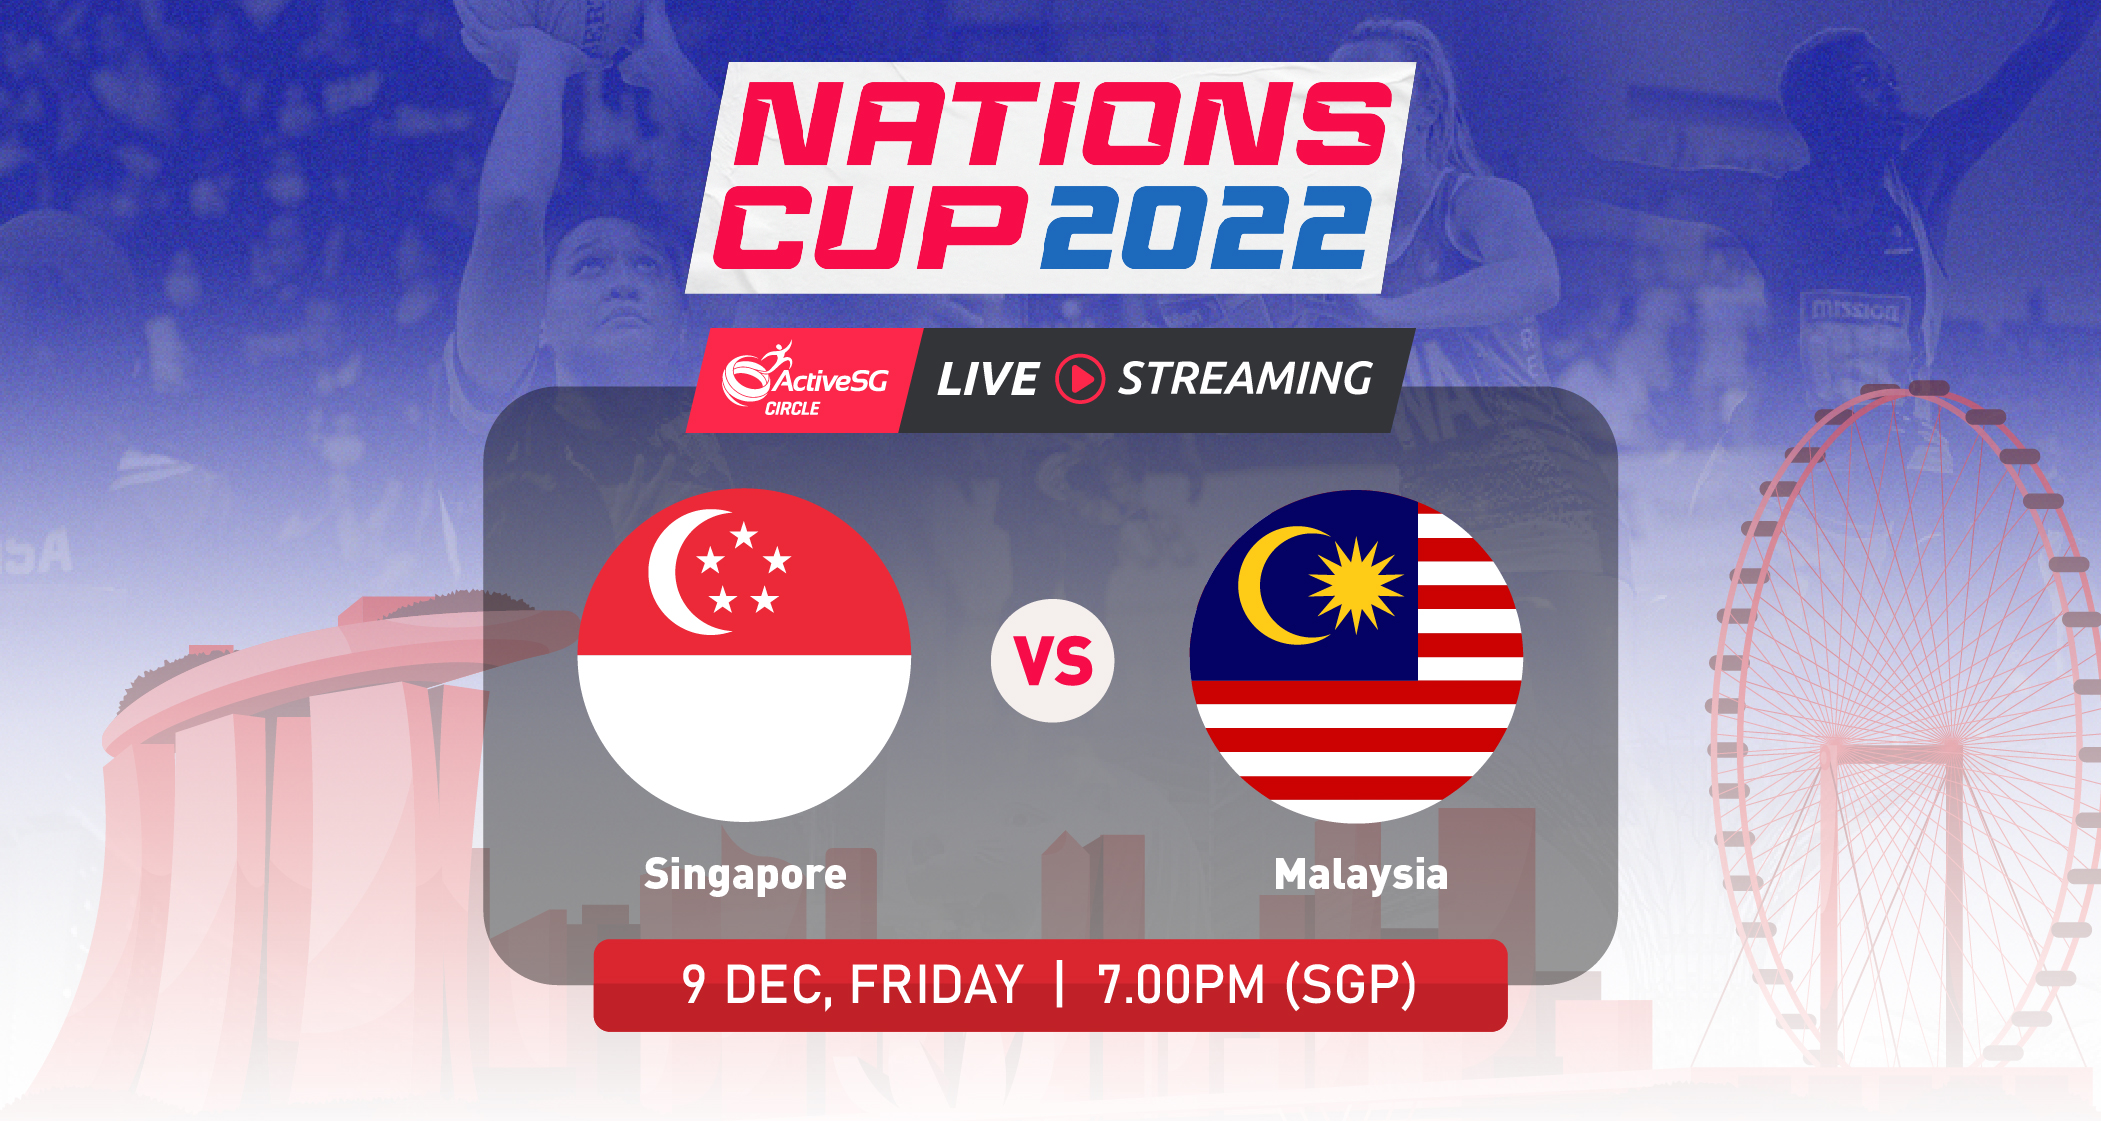 Singapore 🇸🇬 vs 🇲🇾 Malaysia | Nations Cup 2022